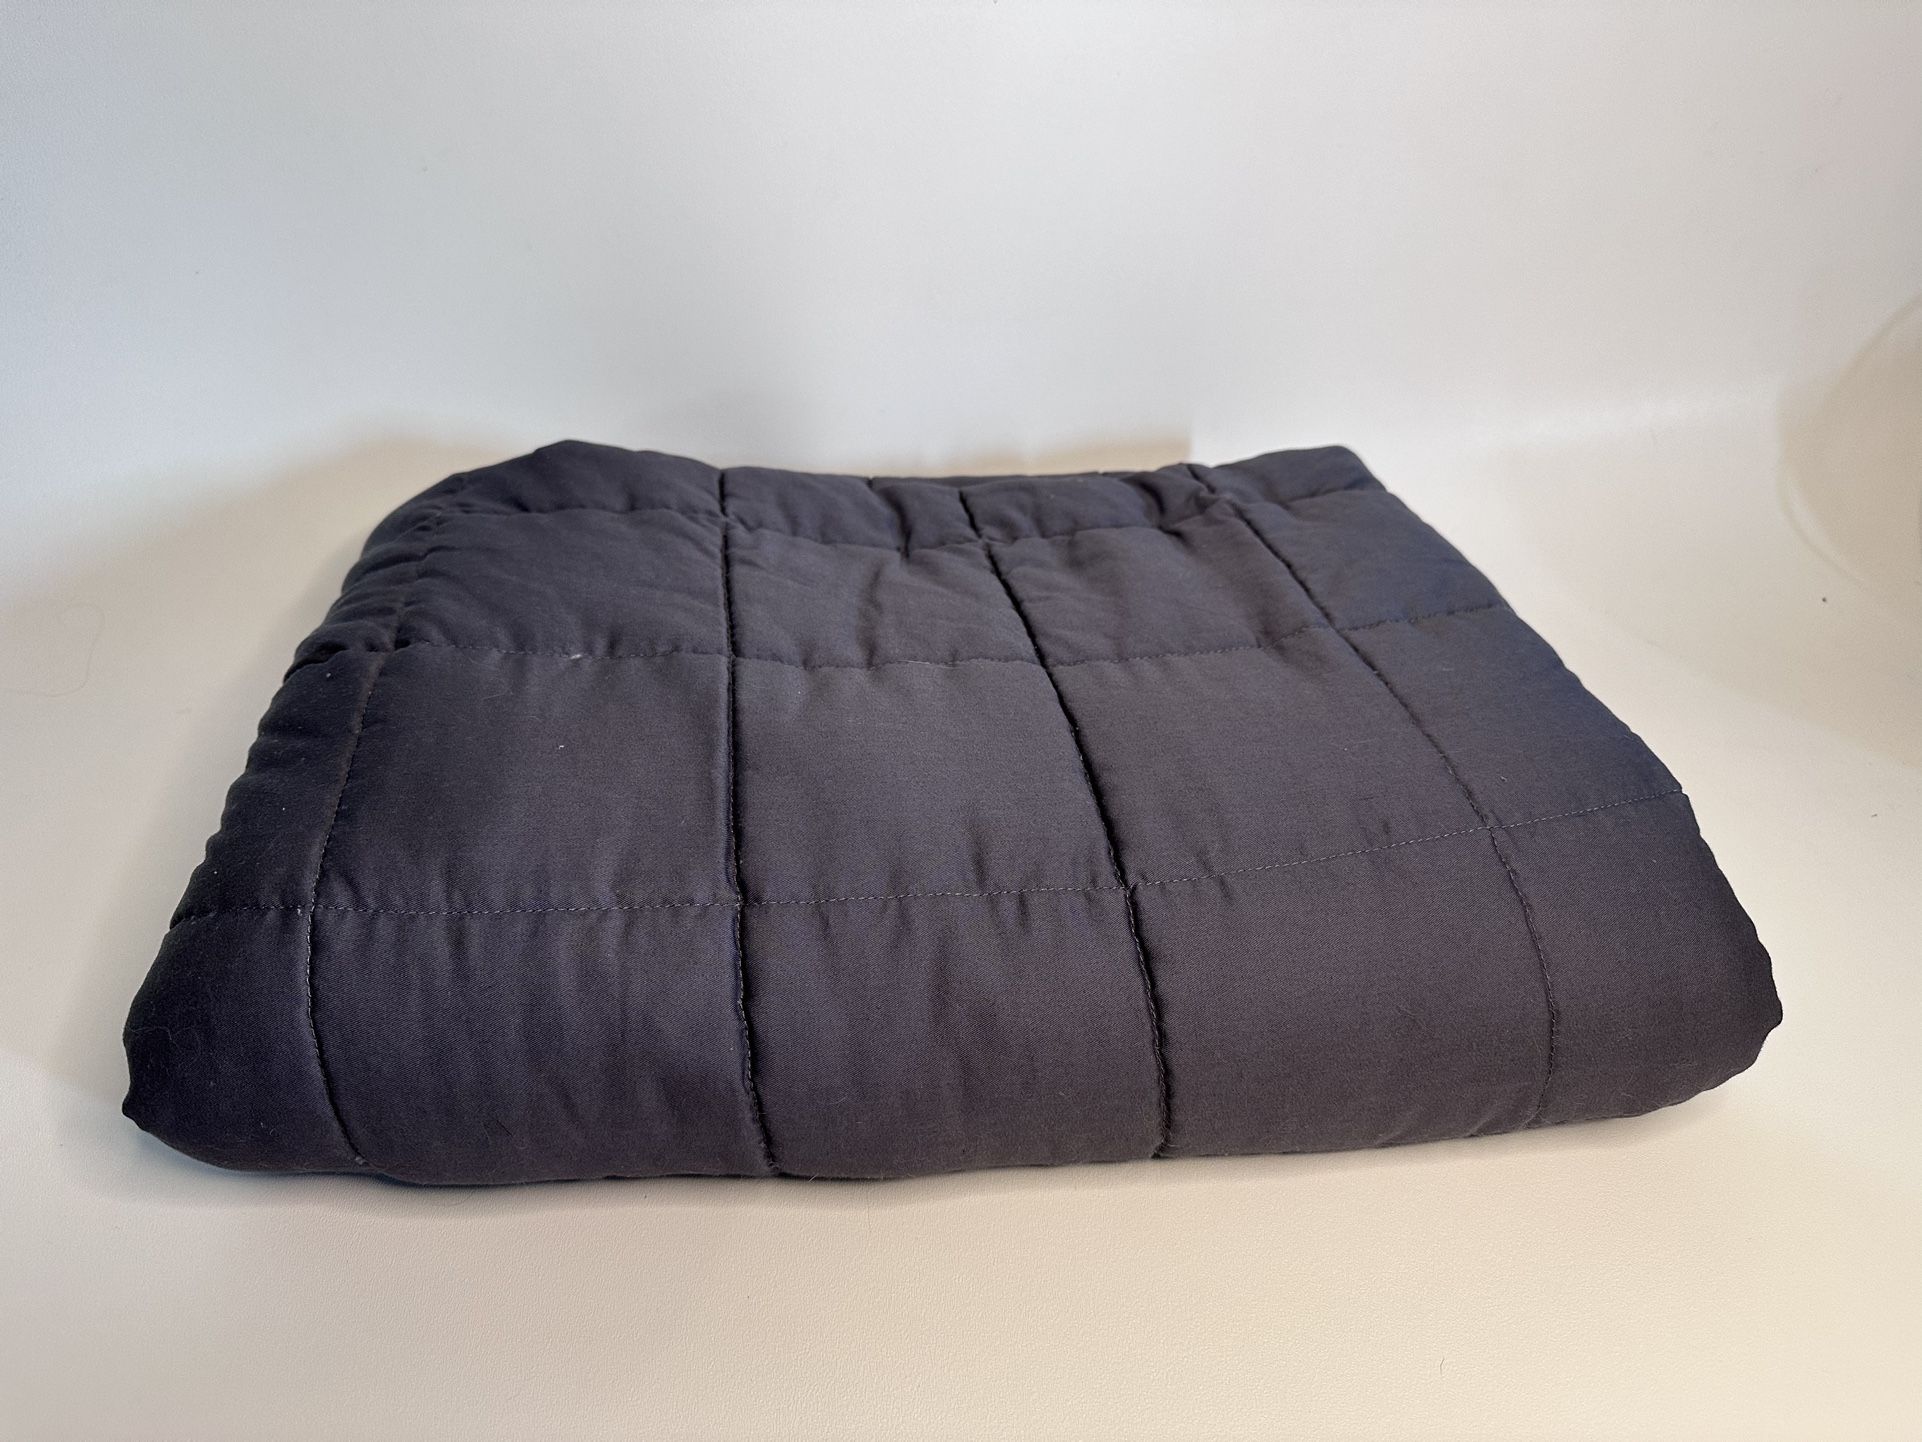 Full/Queen Weighted Blanket 17lbs (pounds) - YnM Brand 60x80inch